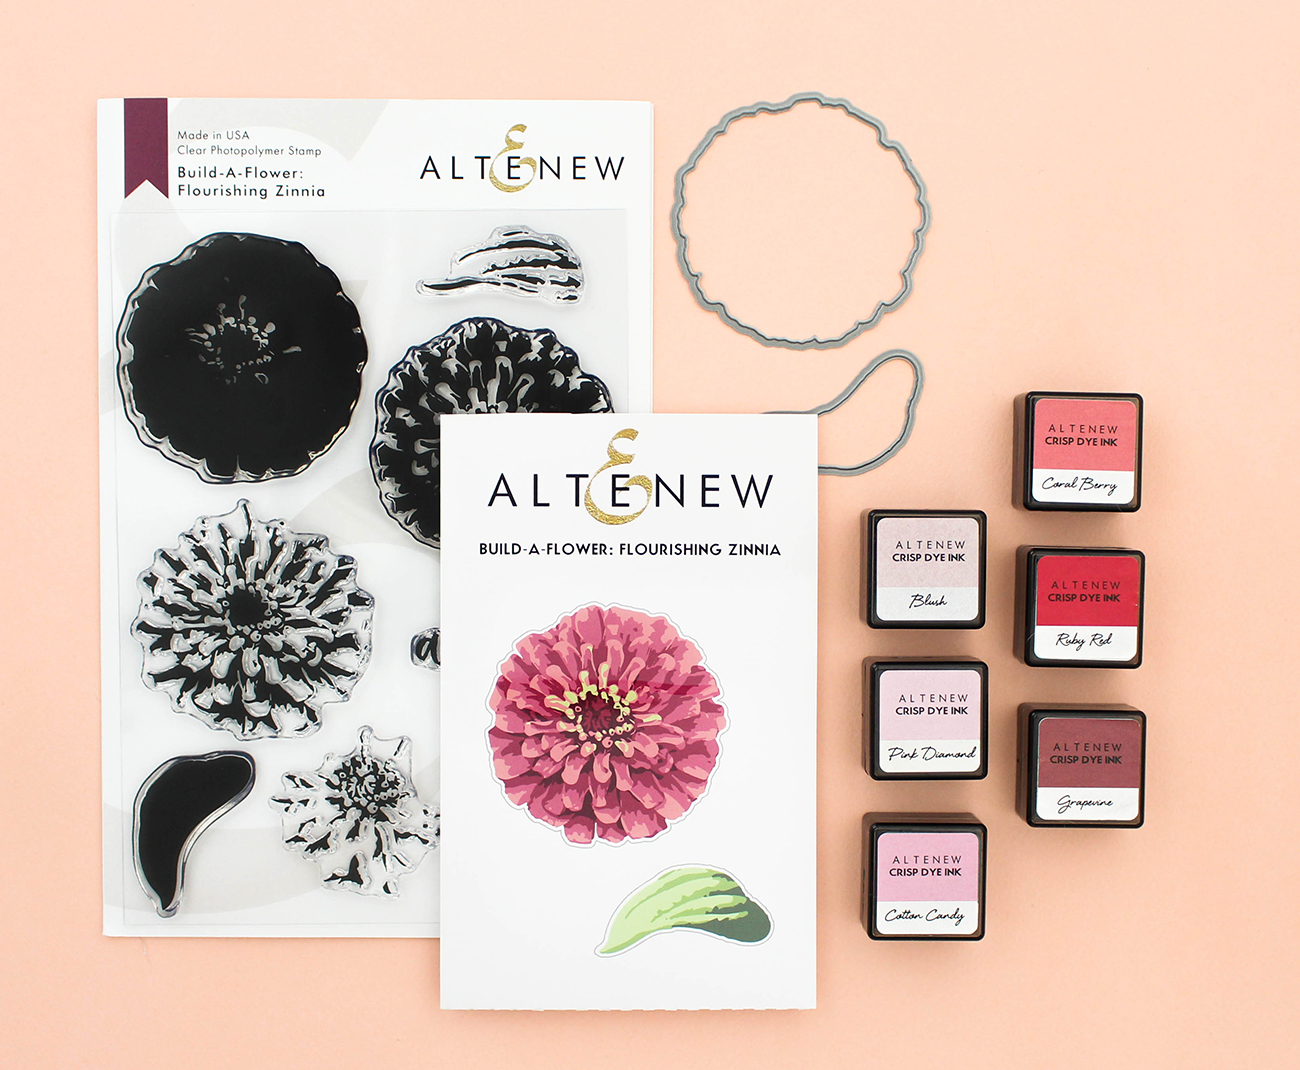 Altenew Build-A-Flower: Flourishing Zinnia Blog Hop + Giveaway @altenew @ziniaredo #altenew #ziniaredo #stamping #stamps #cardmaking #papercrafting